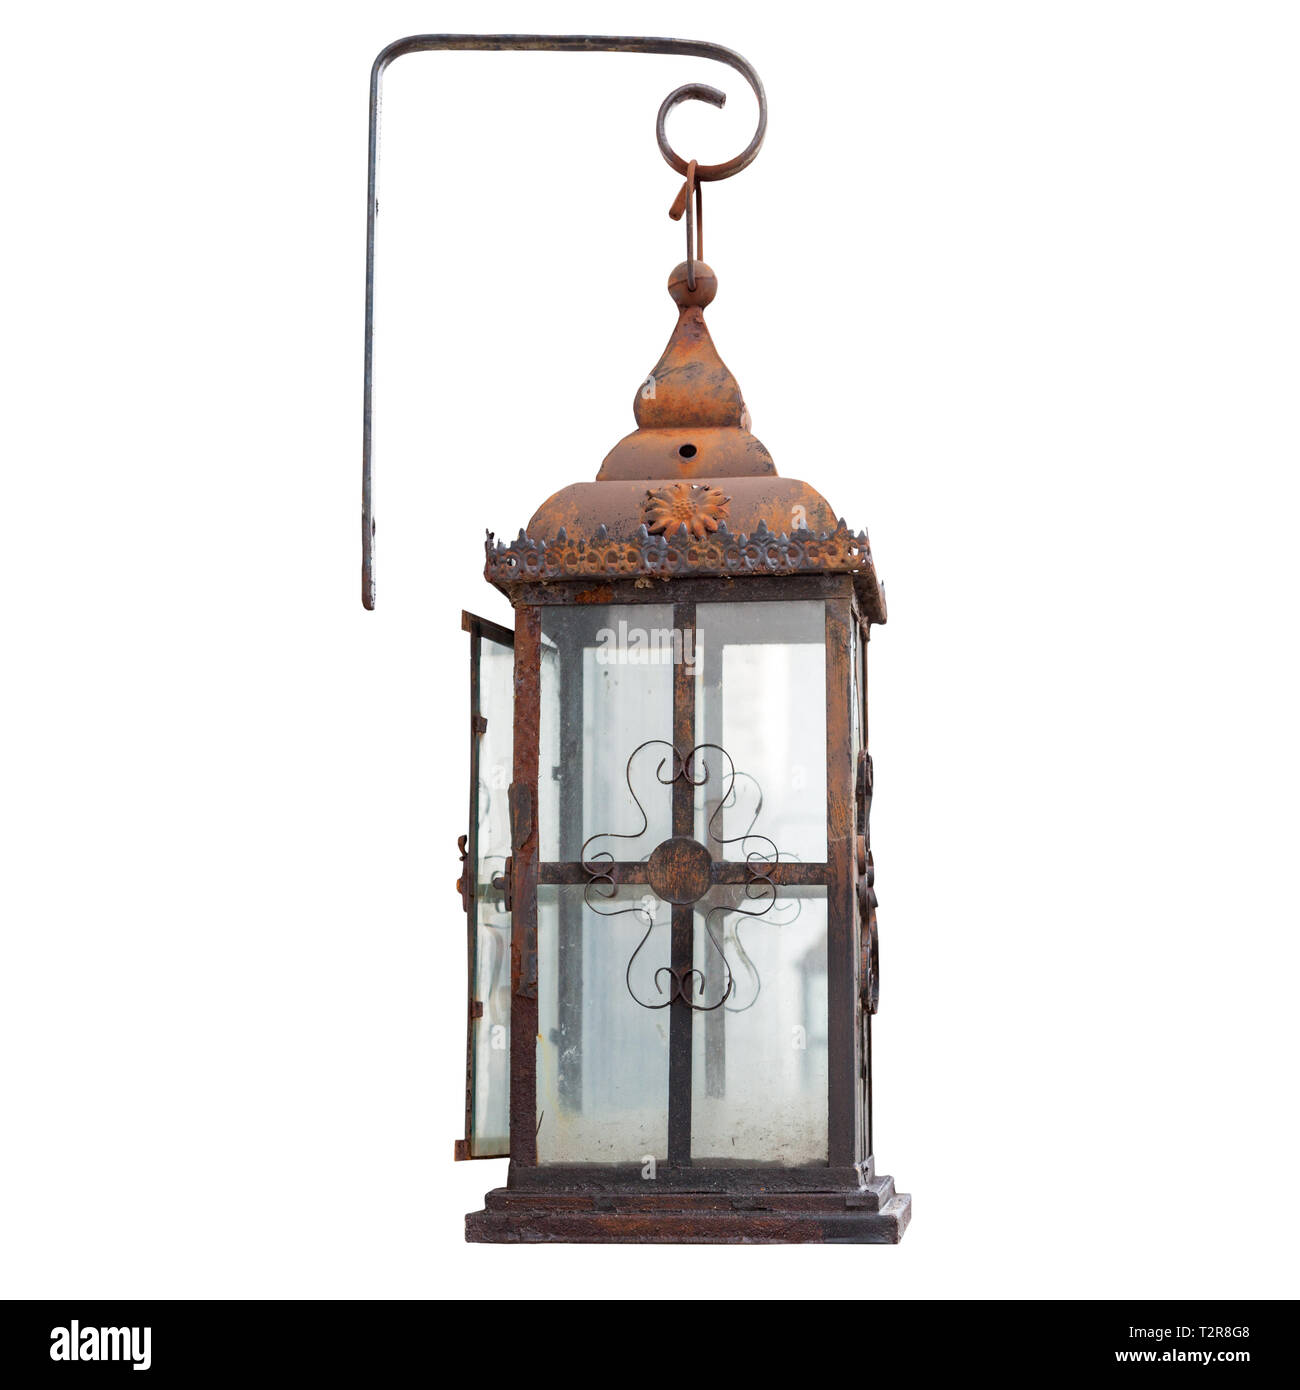 Old vintage rusty street lamp lantern isolated on white background, real picture, front view of one cut out object Stock Photo